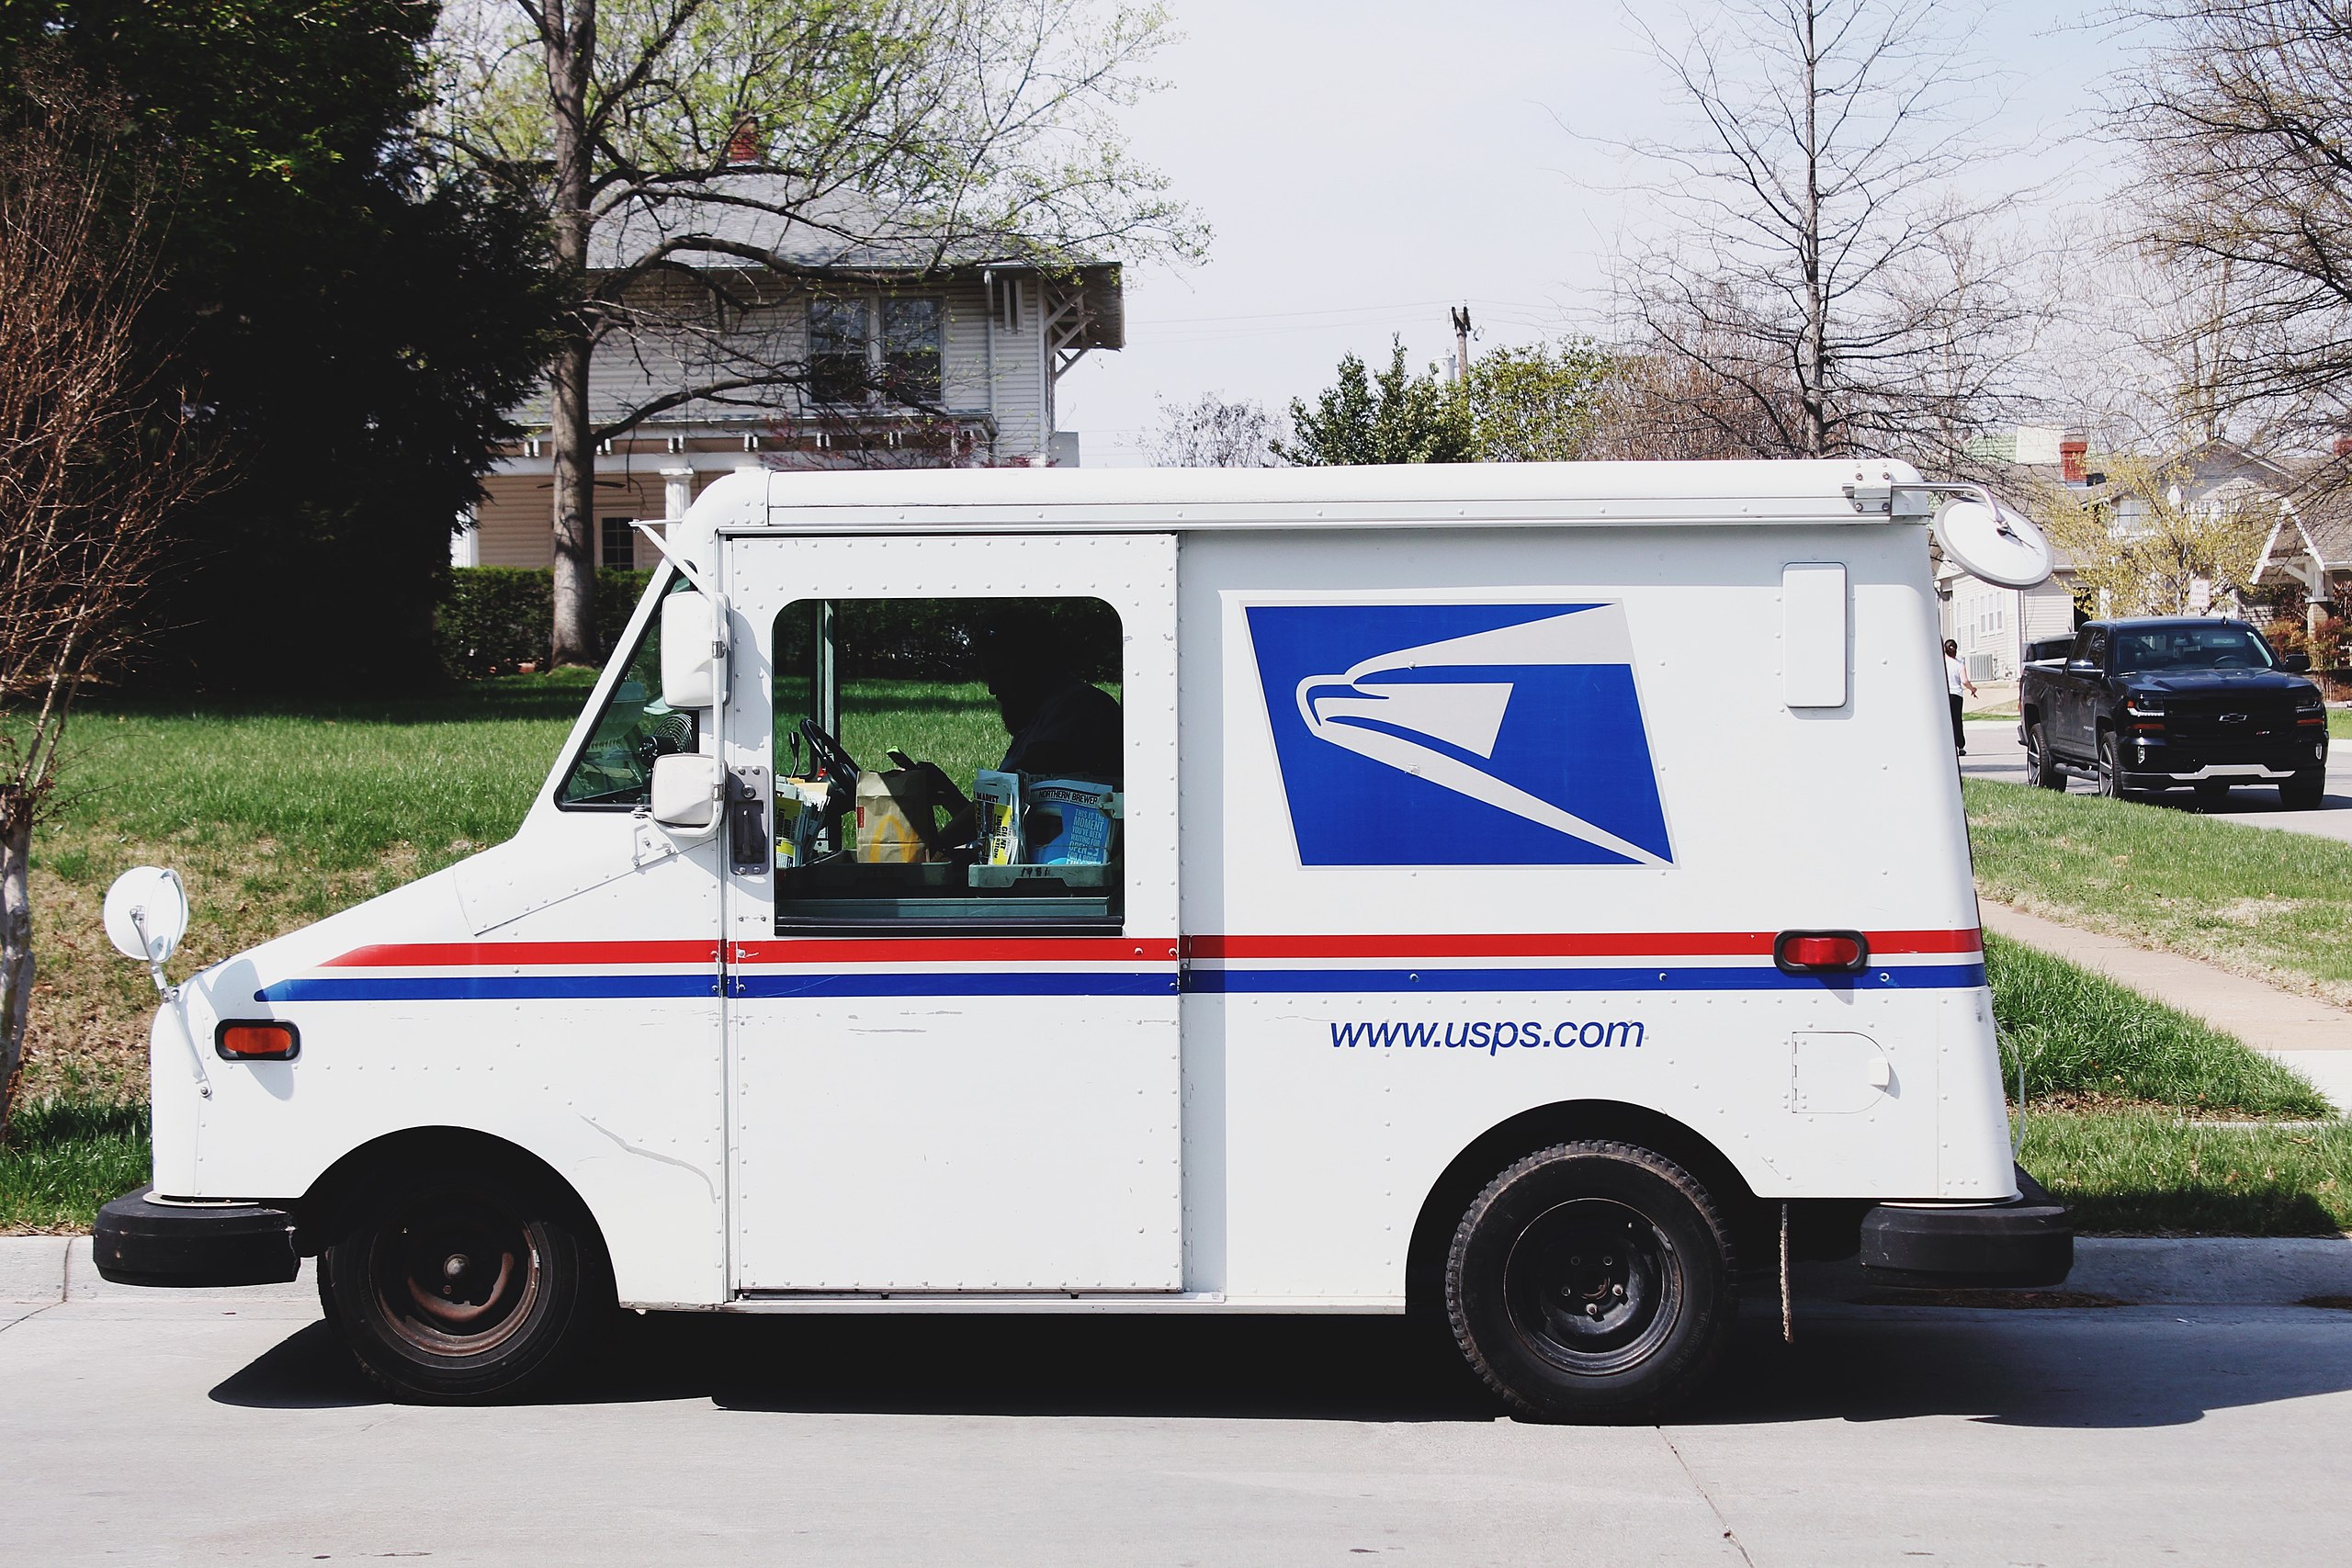 A Grumman LLV USPS mail truck sits in a local neighborhood as a mail truck.